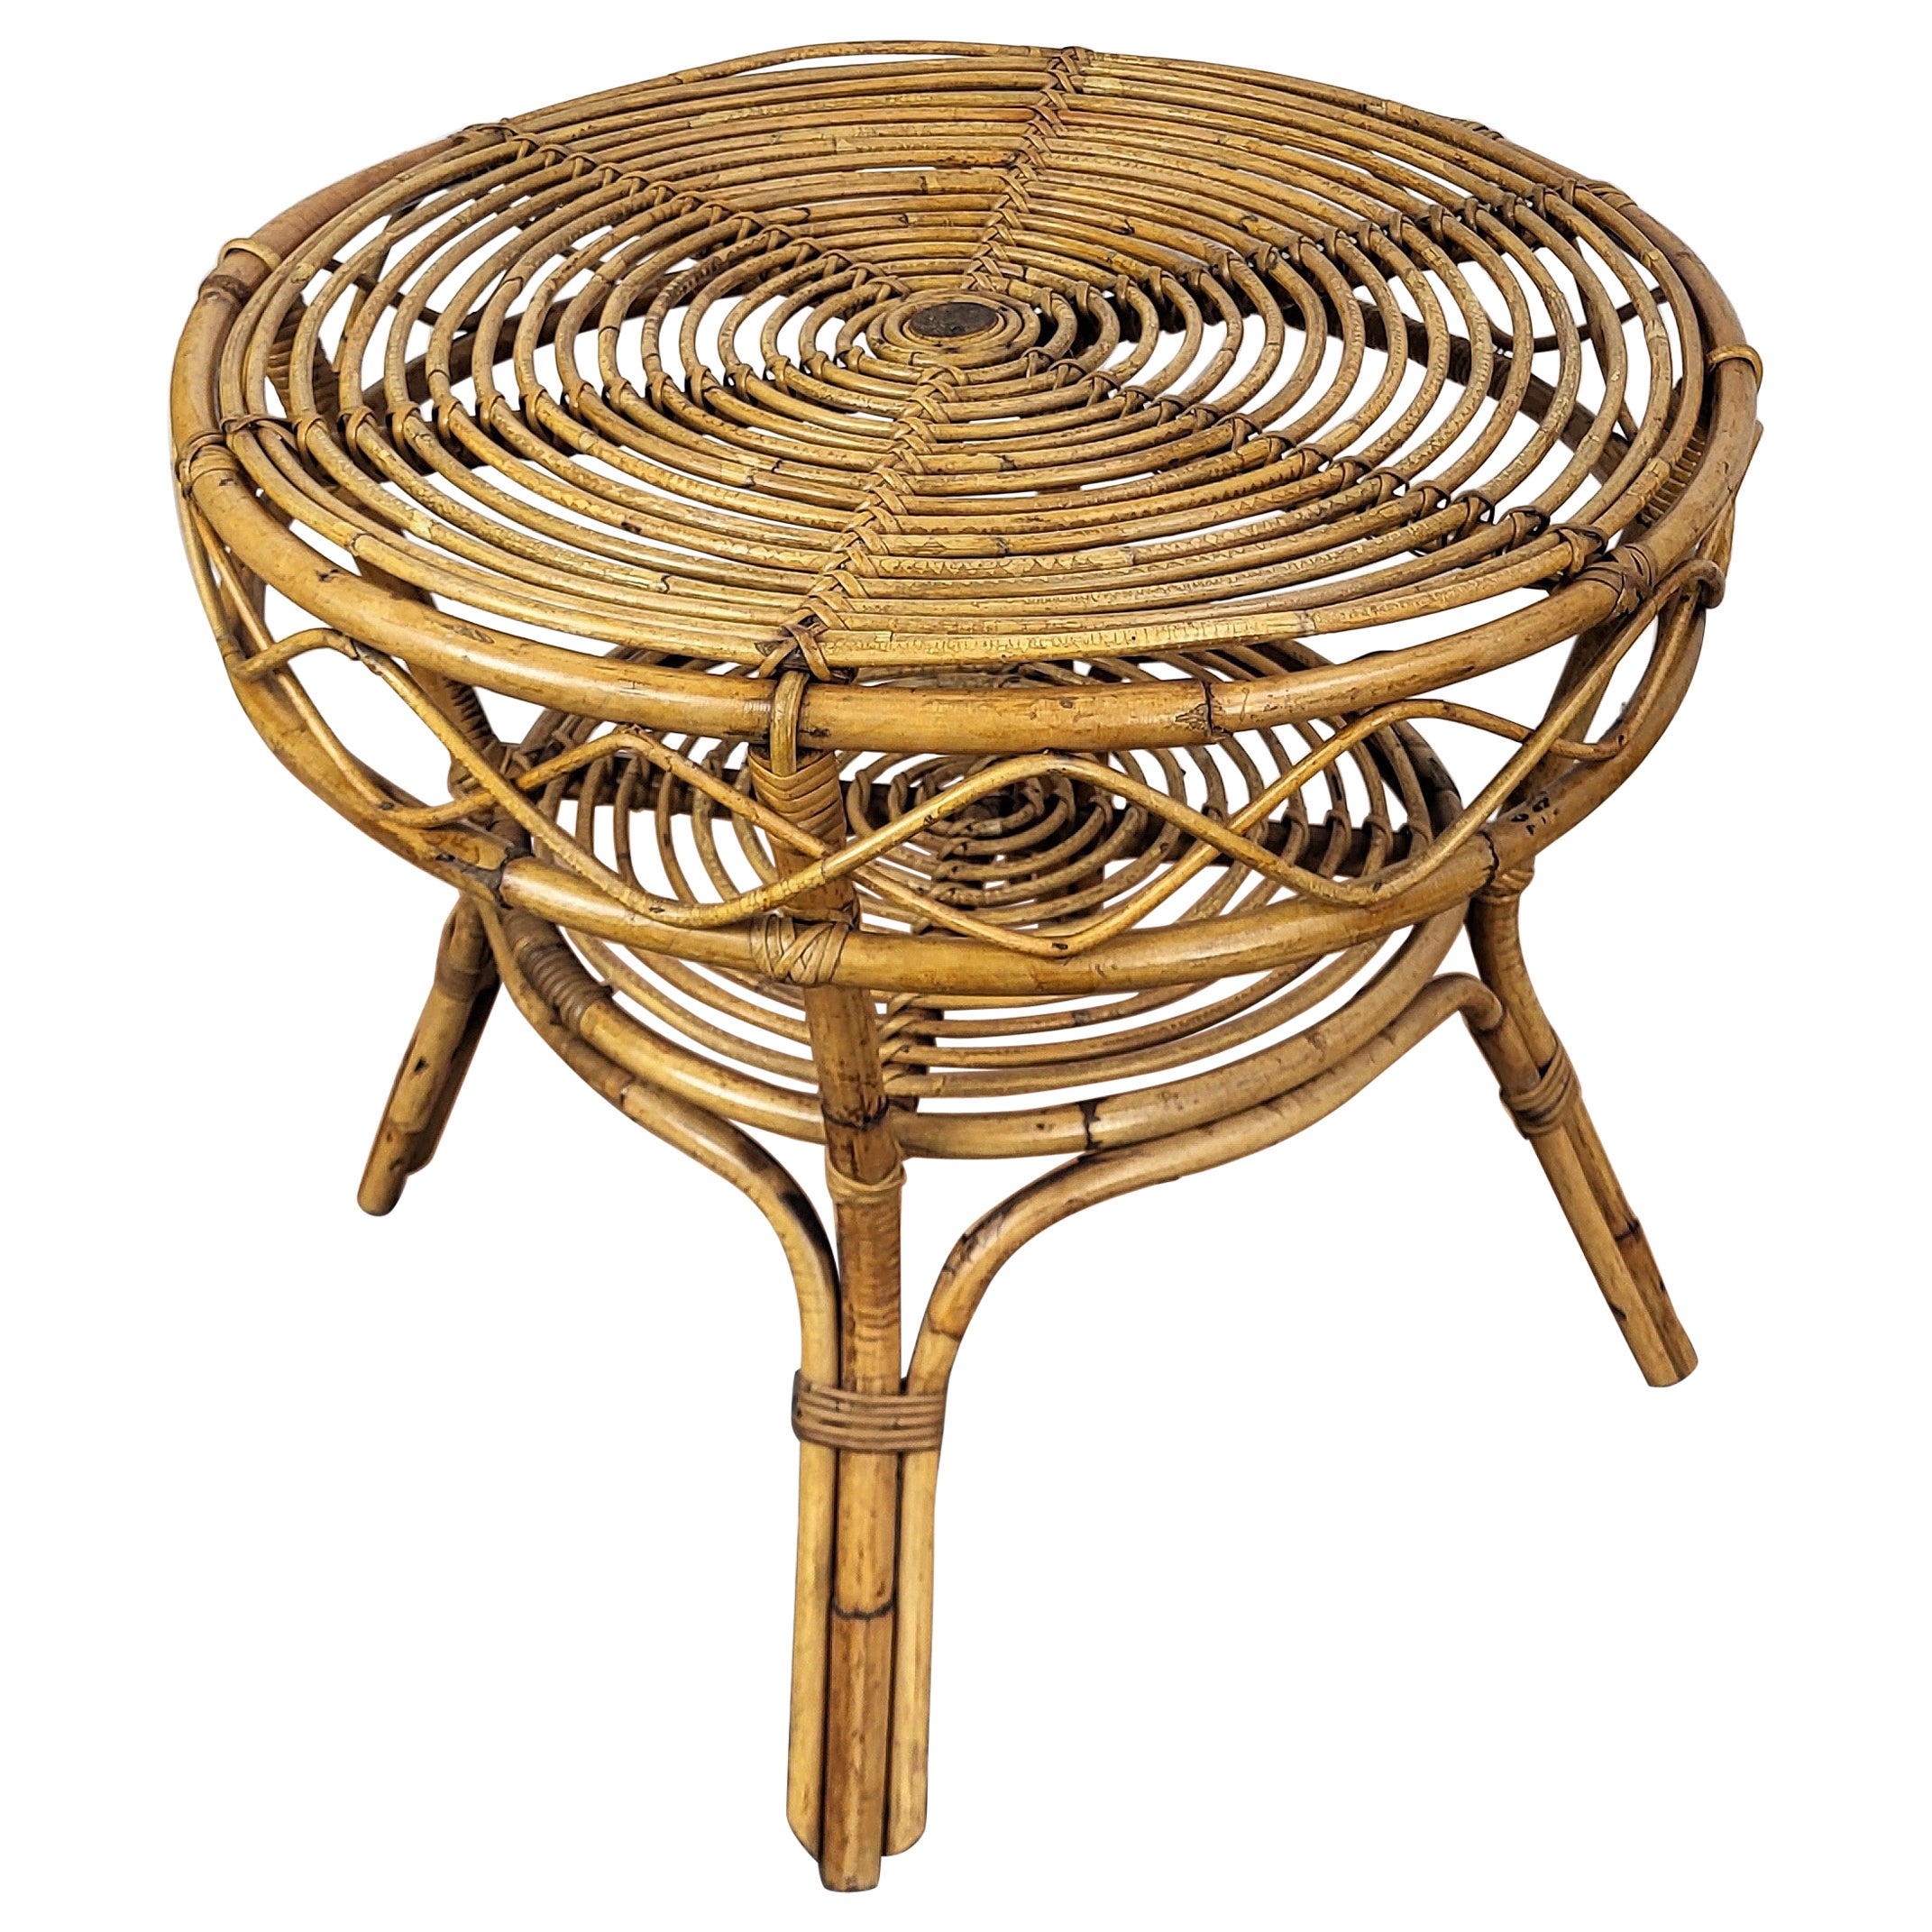 1960s Italian Bamboo Rattan Bohemian French Riviera Round Coffee Table For Sale